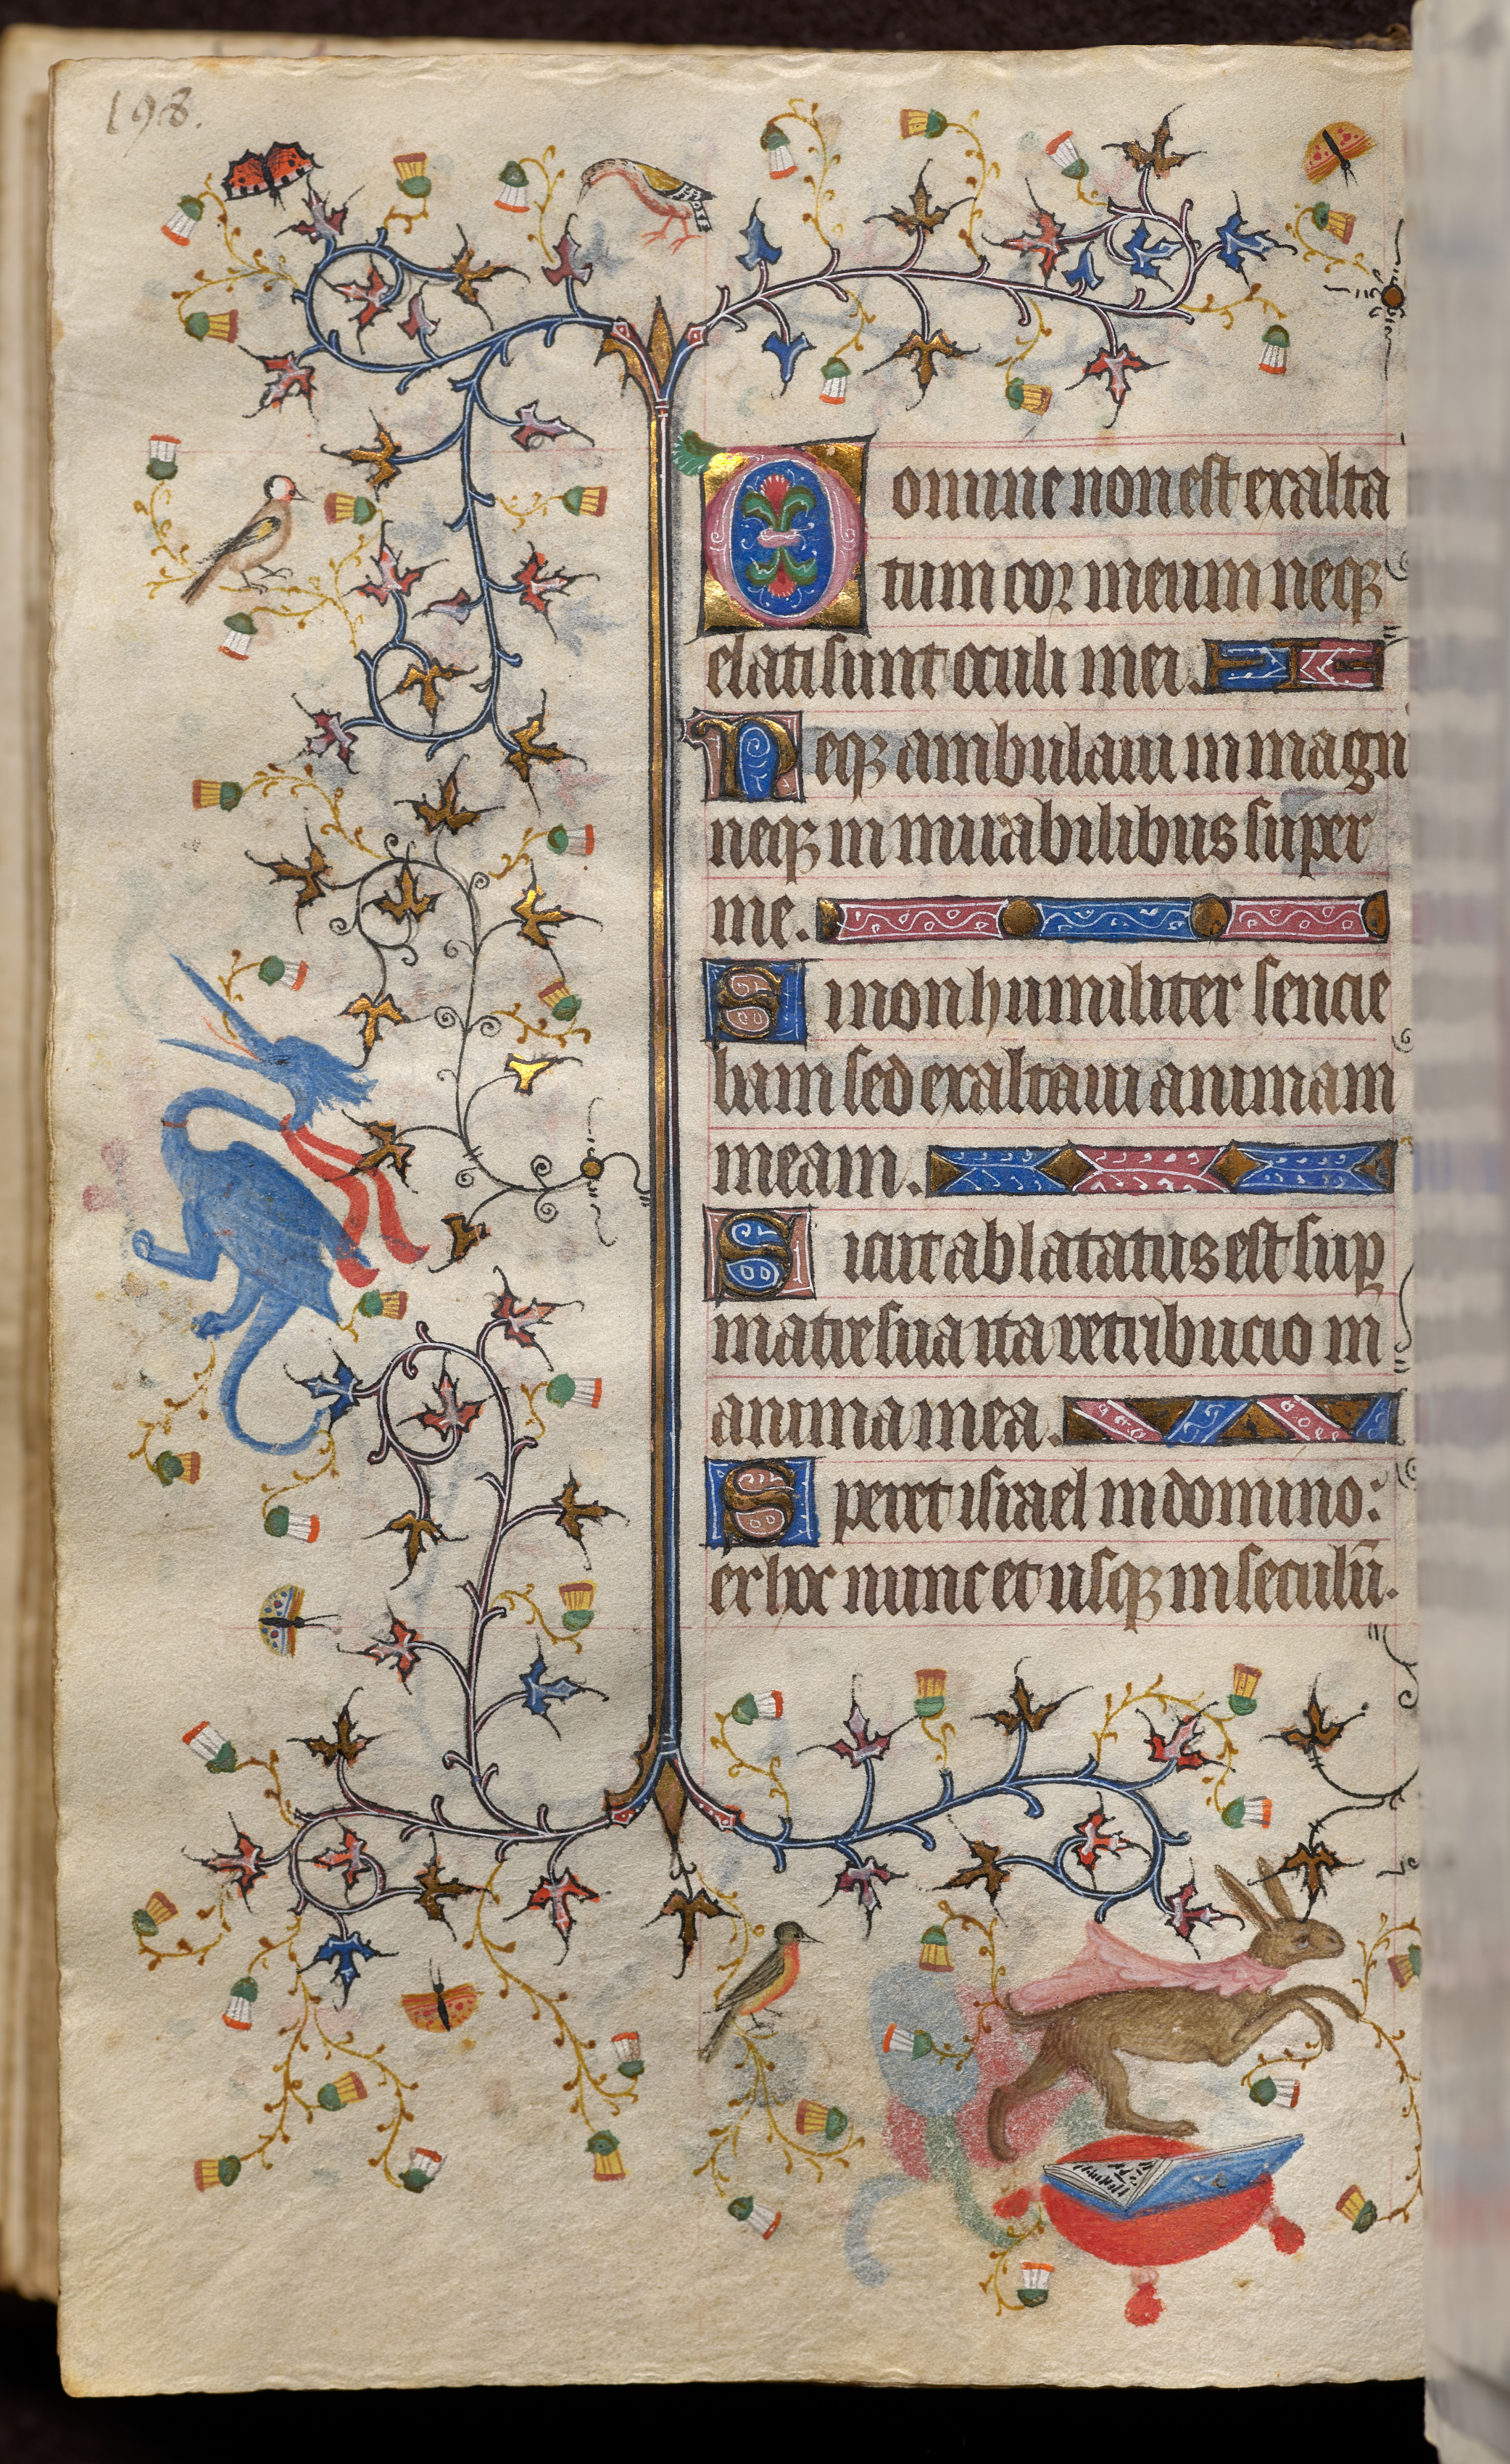 Hours of Charles the Noble, King of Navarre (1361-1425): fol. 99v, Text